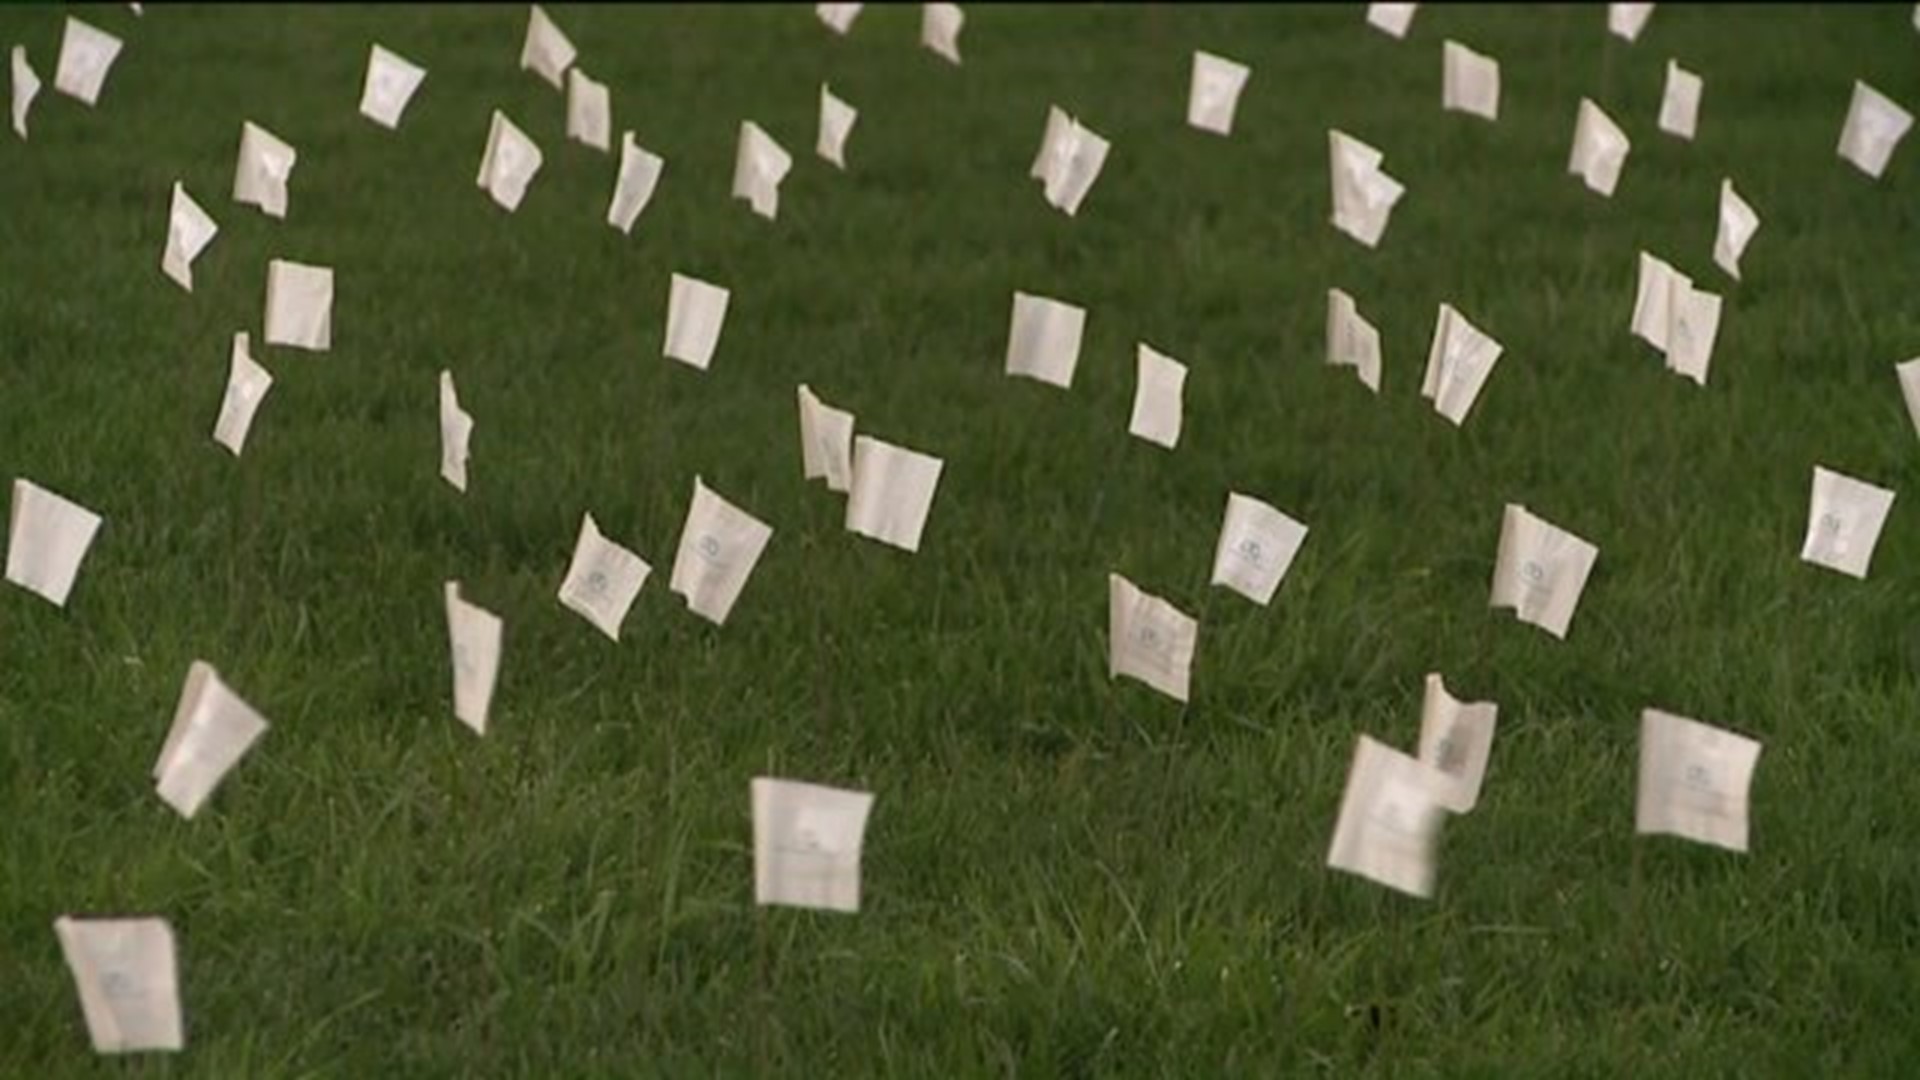 1600 Flags Wave in Scranton for Cancer Awareness